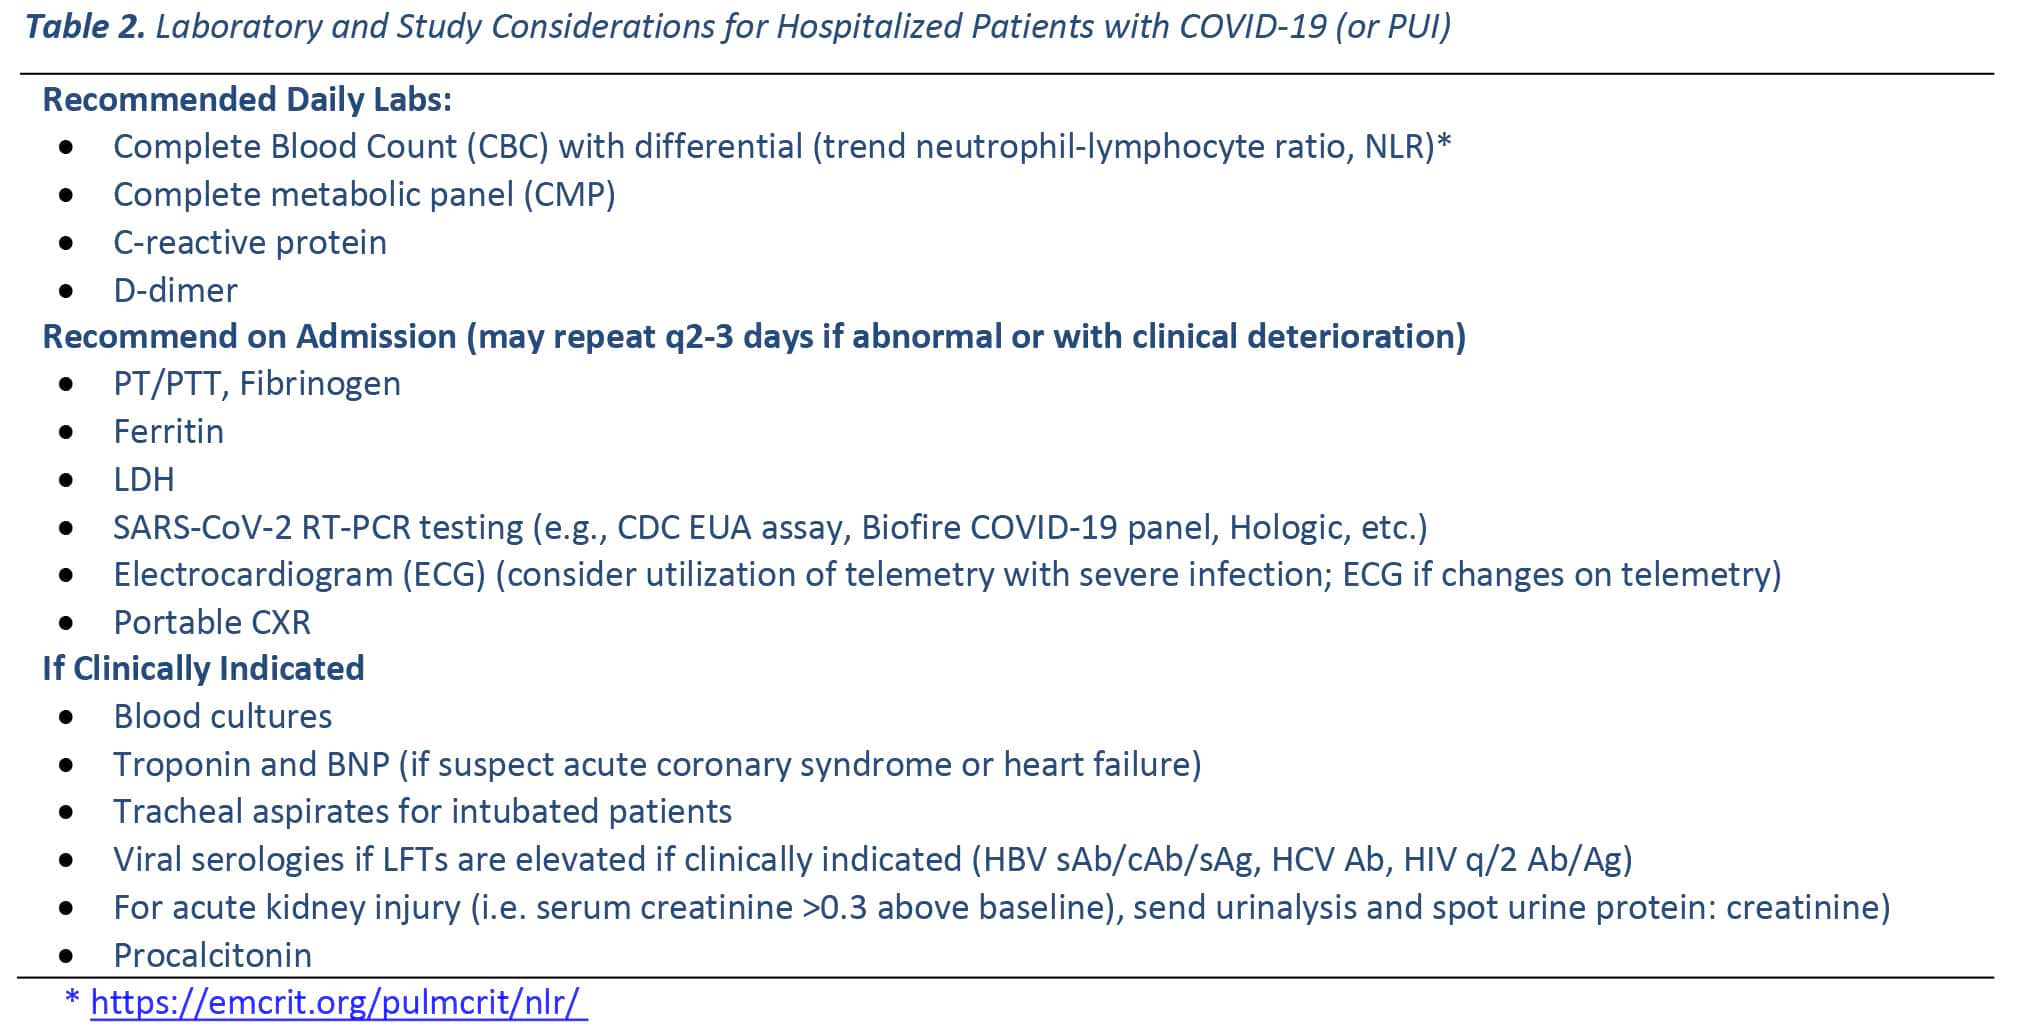 Laboratory and Study Considerations for Hospitalized Patients with COVID-19 (or PUI)